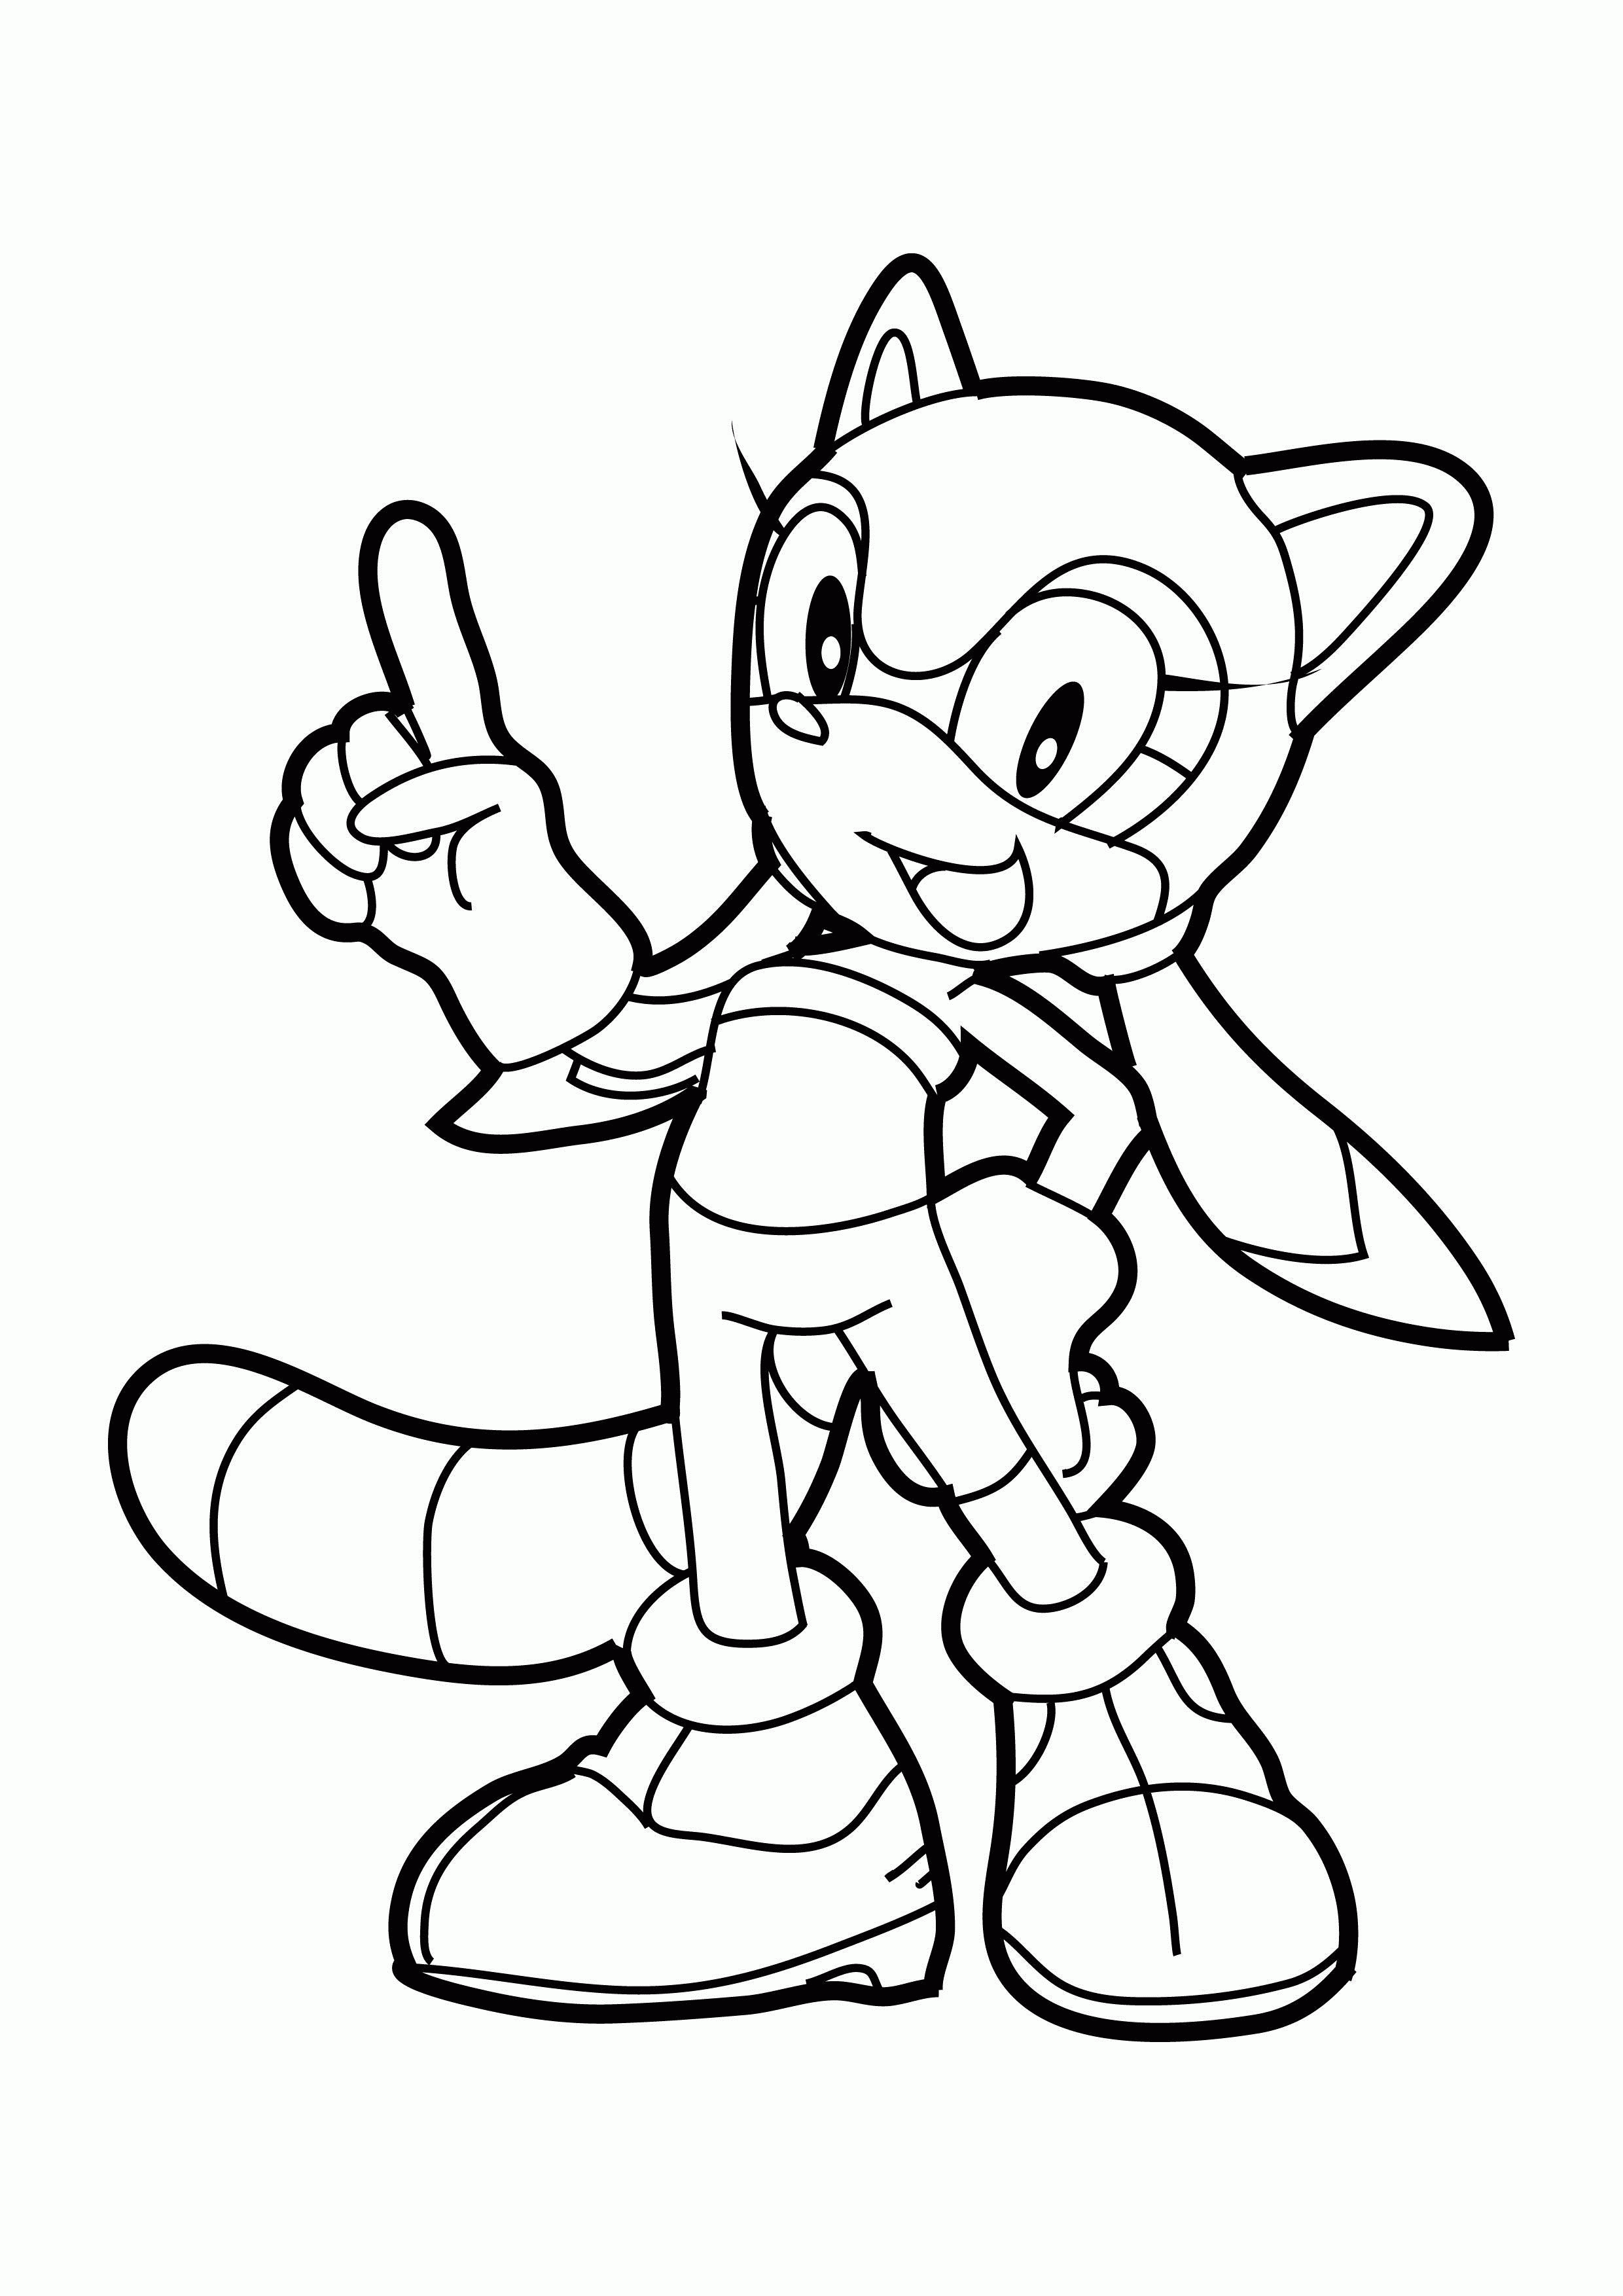 As a teacher, you certainly need a good media to teach your students attractively. Free Sonic Coloring Pages Online For Free Download Free Sonic Coloring Pages Online For Free Png Images Free Cliparts On Clipart Library